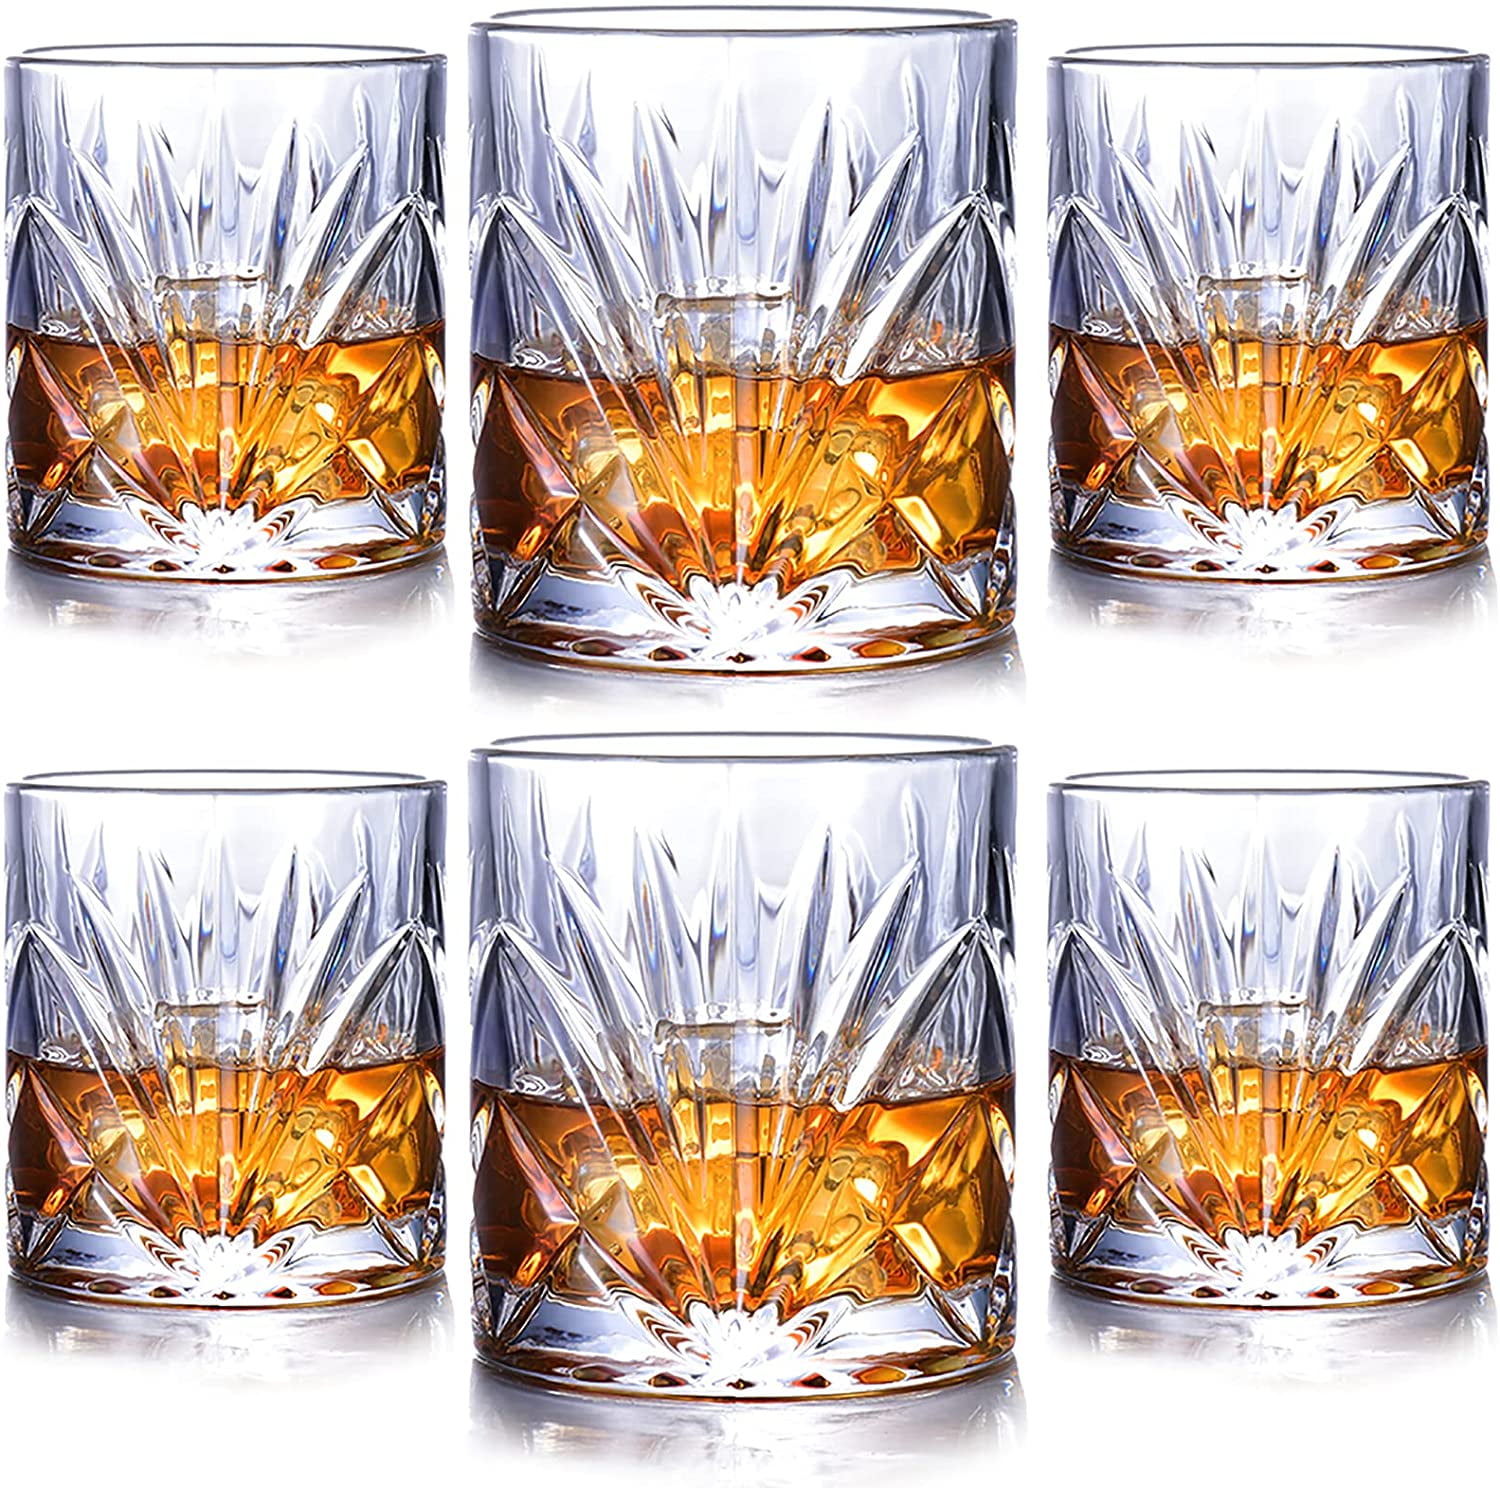 Whiskey Glasses,Old Fashioned Whiskey Glass Set of 6 Whiskey Glass,Whiskey Gifts for Men Scotch Lovers,Style Glassware for Bourbon Rocks Cocktail ScotchRum Glasses,Bar Whiskey Glasses Cup 